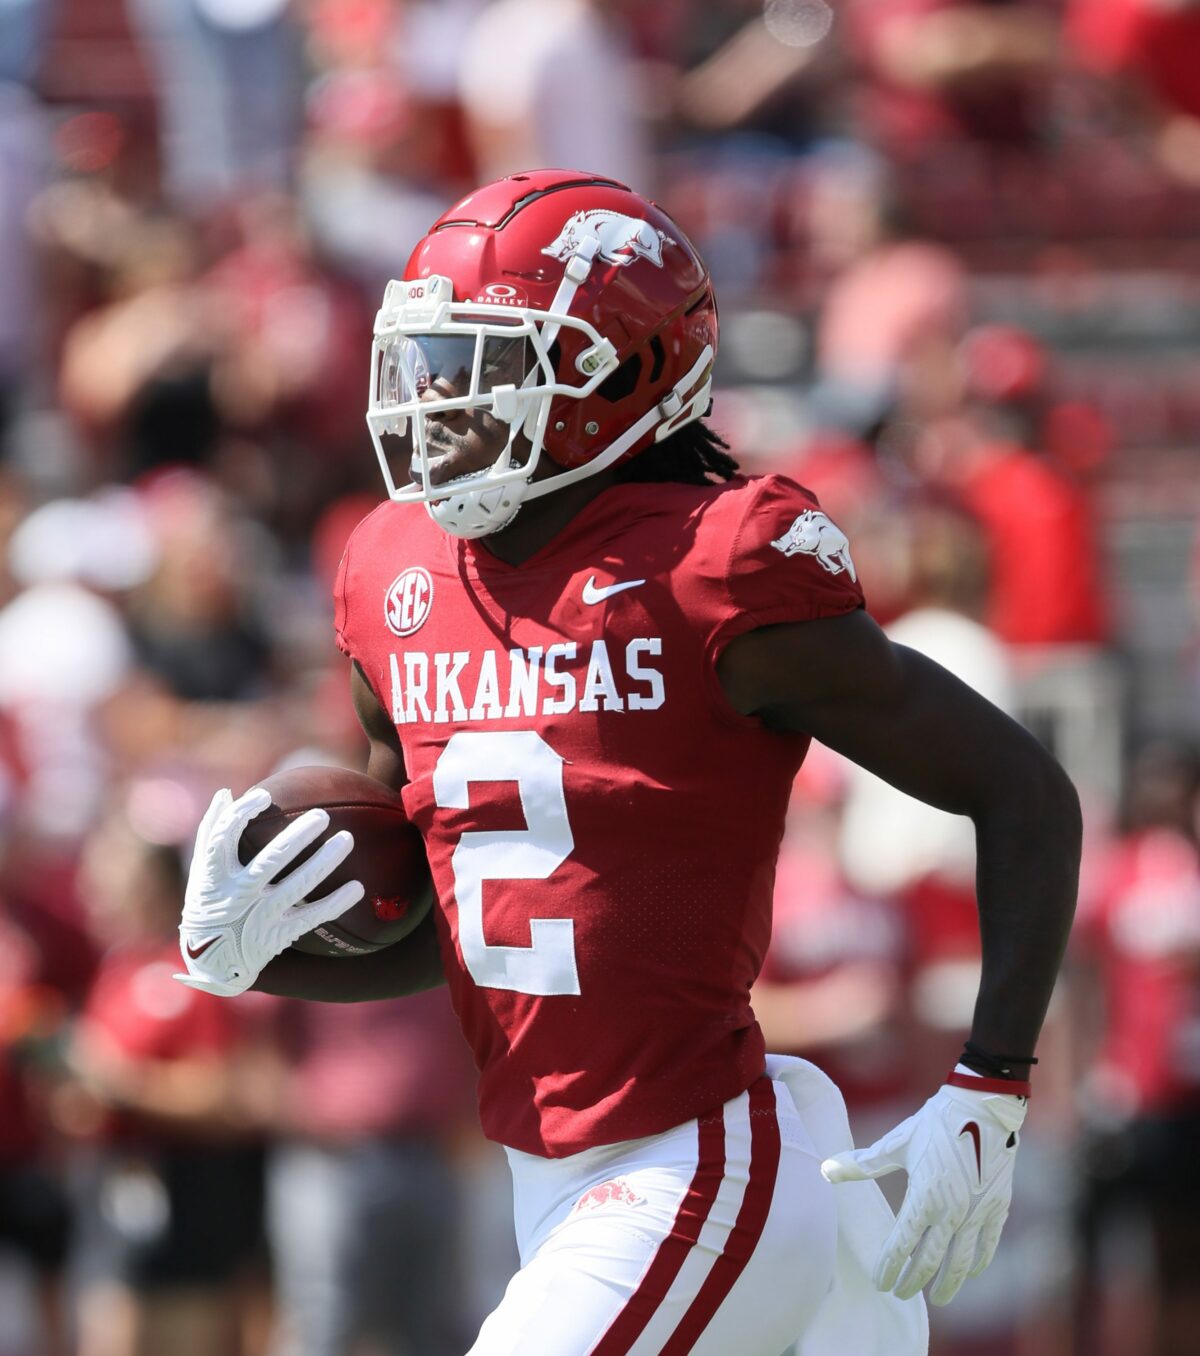 Arkansas wideouts dealing with injury woes heading into Saturday’s spring game